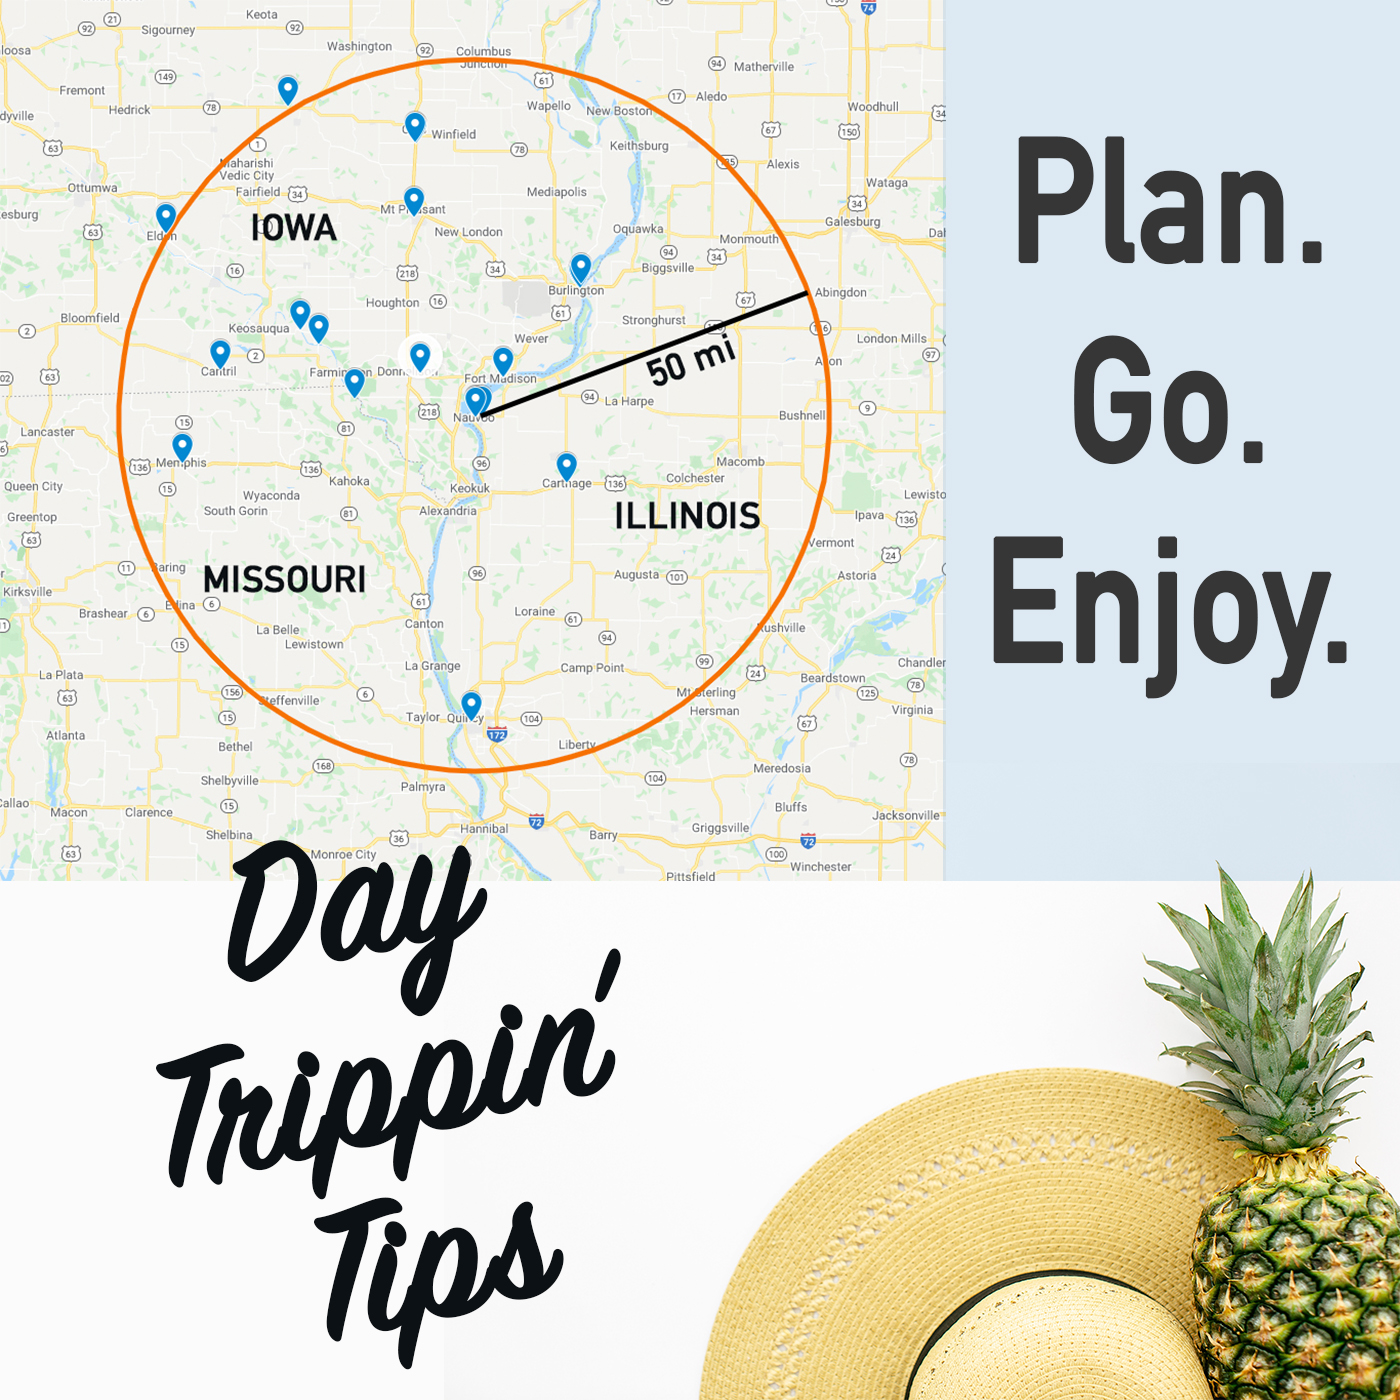 worthy detours trip planning tips